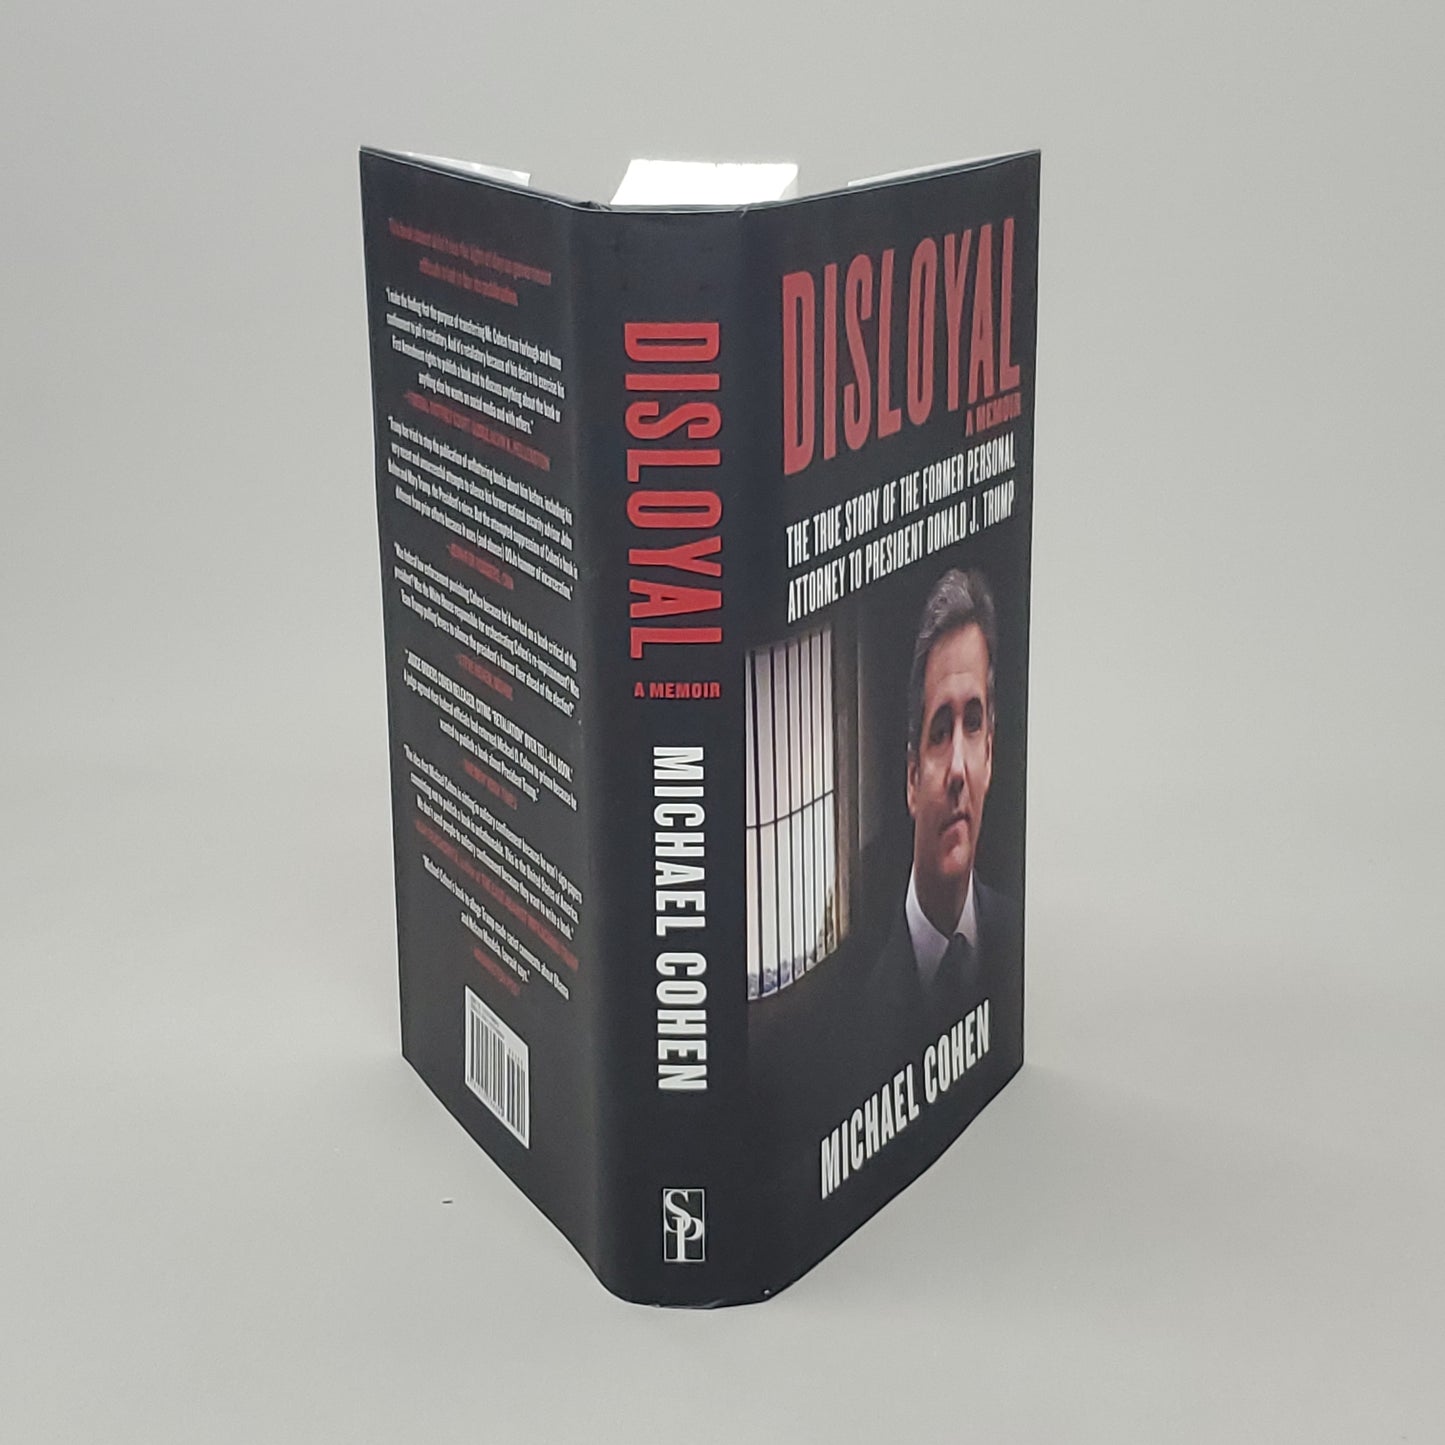 DISLOYAL The True Story of the Former Personal Attorney to President Donald J. Trump by Michael Cohen Book Hardback (New)